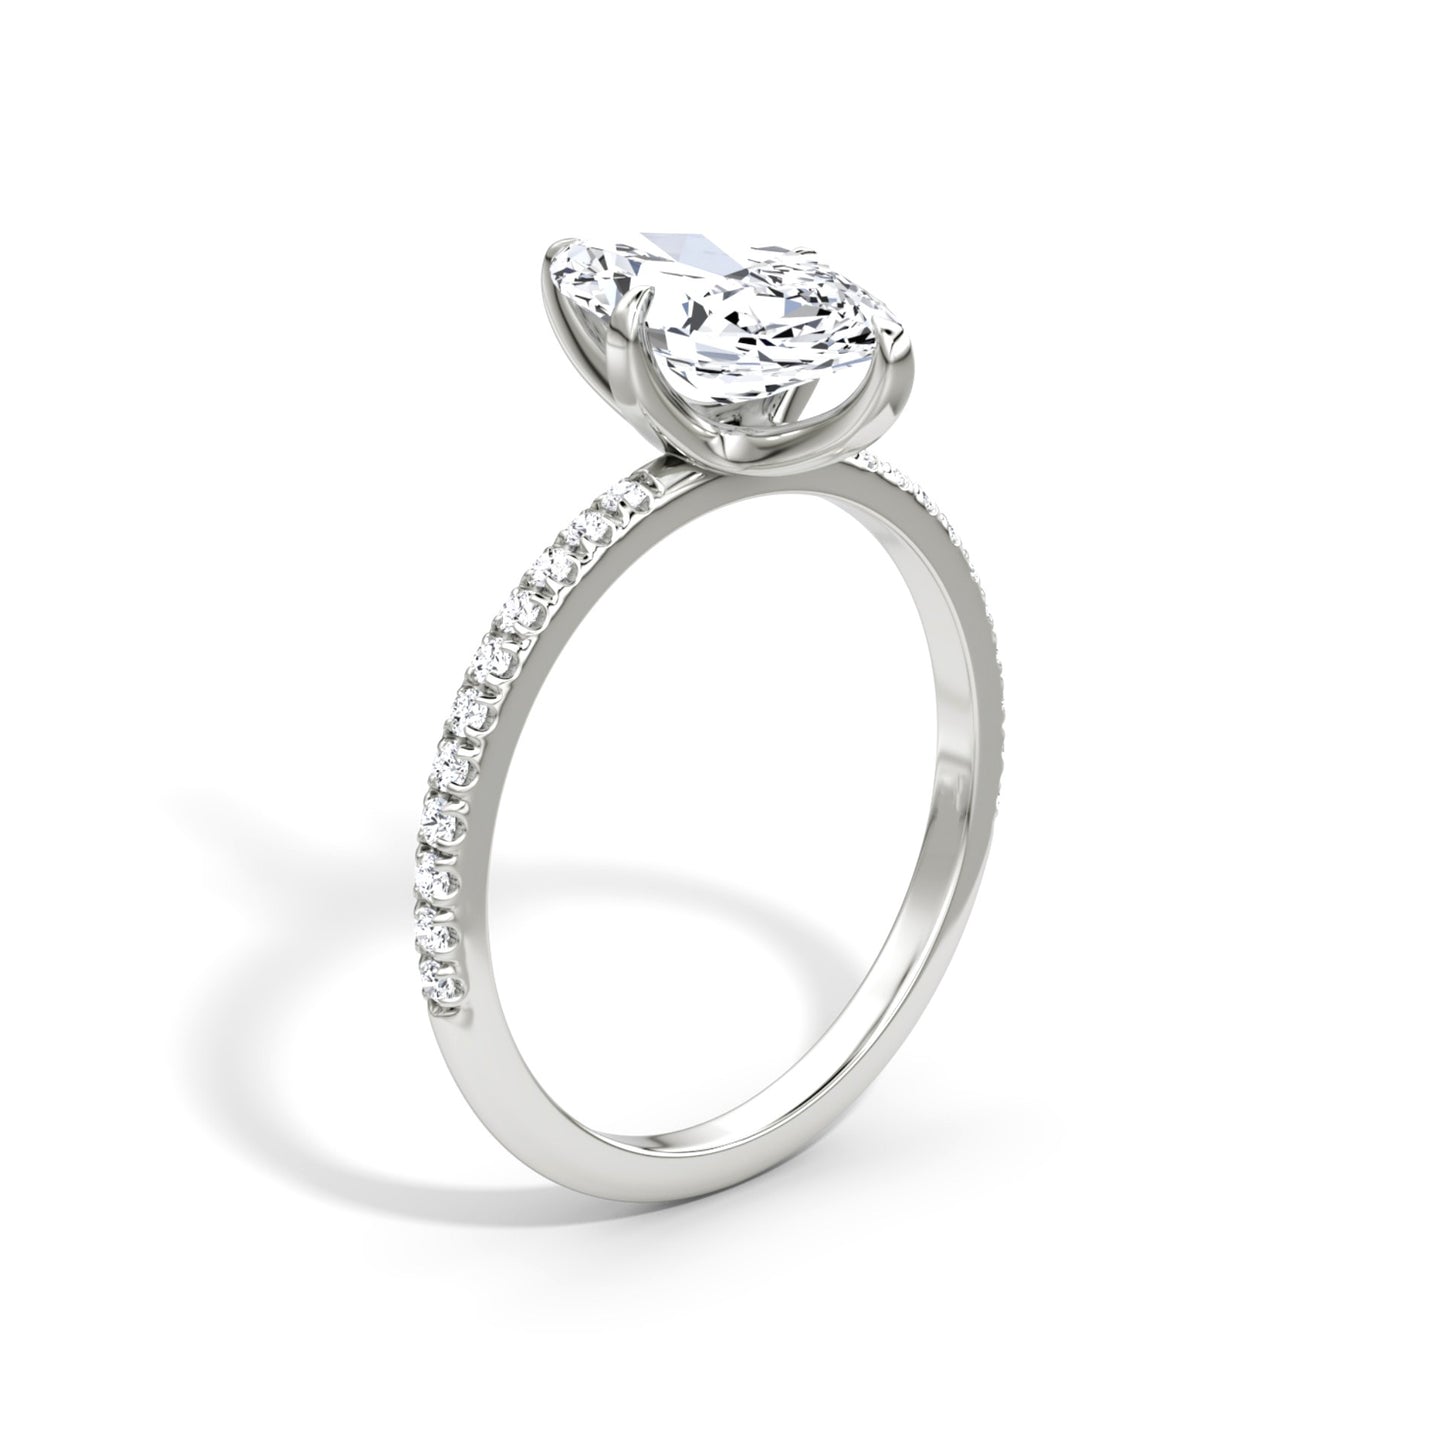 Marquise Cut Diamond Pave Band Ring - Prime & Pure